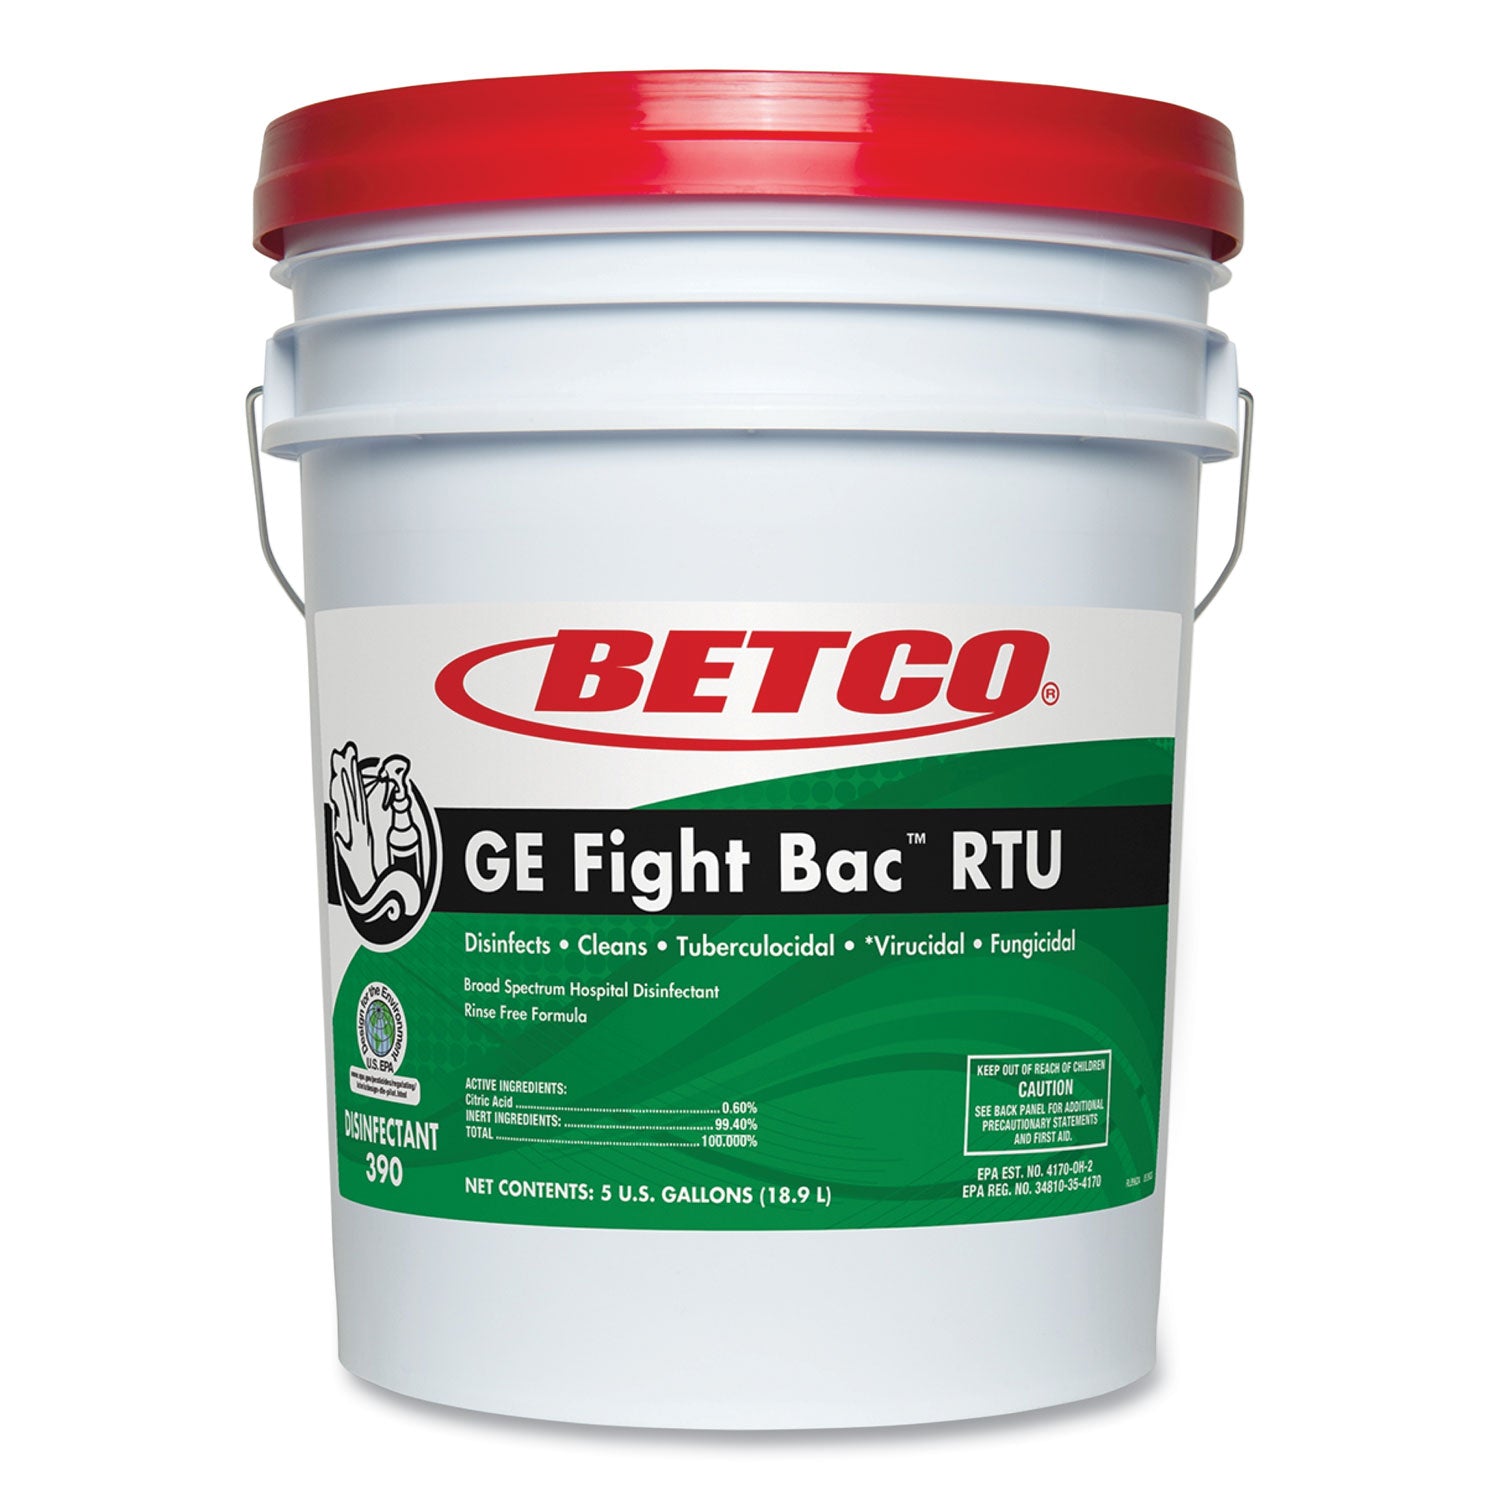 fight-bac-rtu-disinfectant-fresh-scent-5-gal-pail_bet3900500 - 1